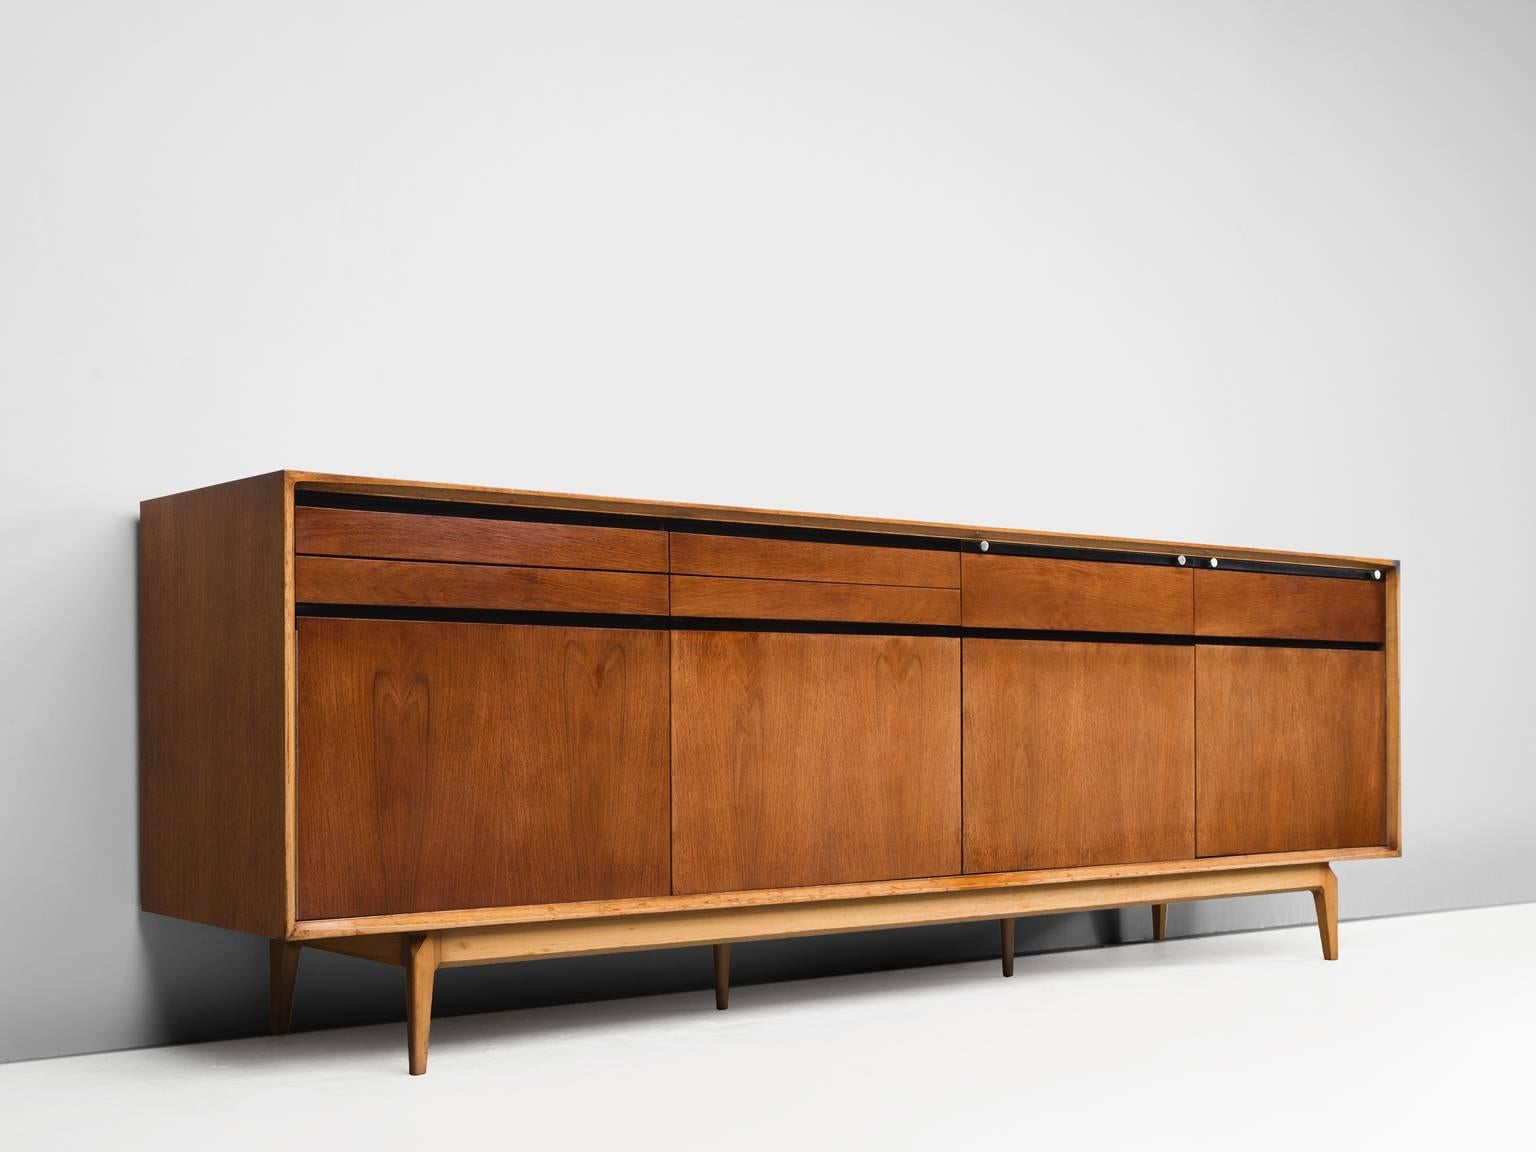 Sideboard, rosewood and walnut by De Coene, Belgium, 1958.

This sideboard is well-constructed and detailed in a discrete manner. Produced in rosewood and walnut. The piece shows well-designed lines and interesting details, such as the folding